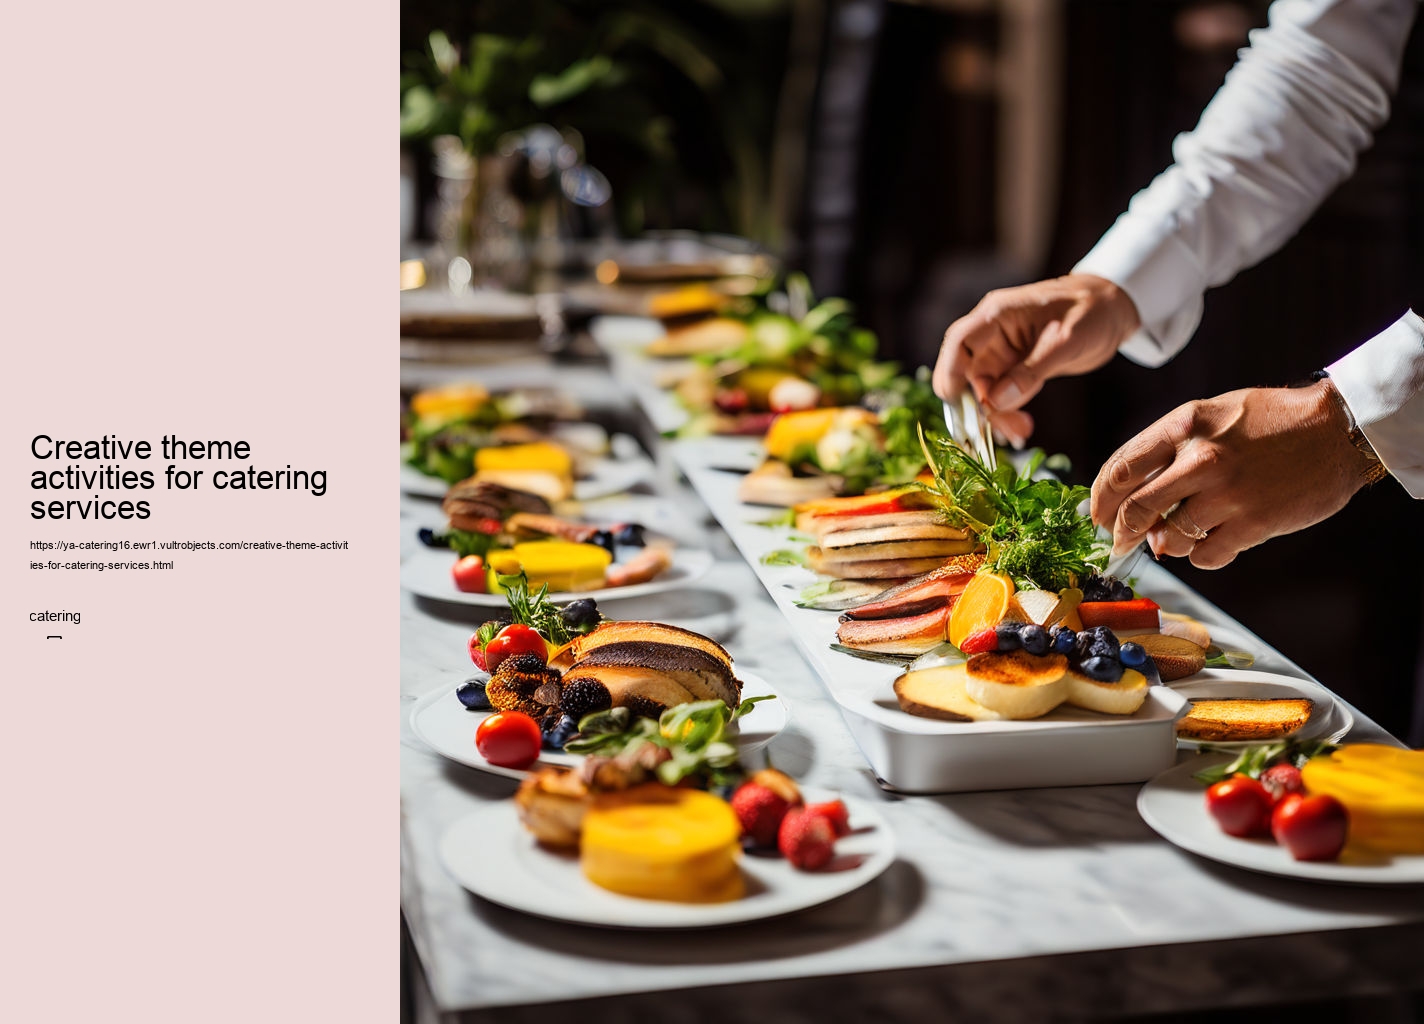 Creative theme activities for catering services